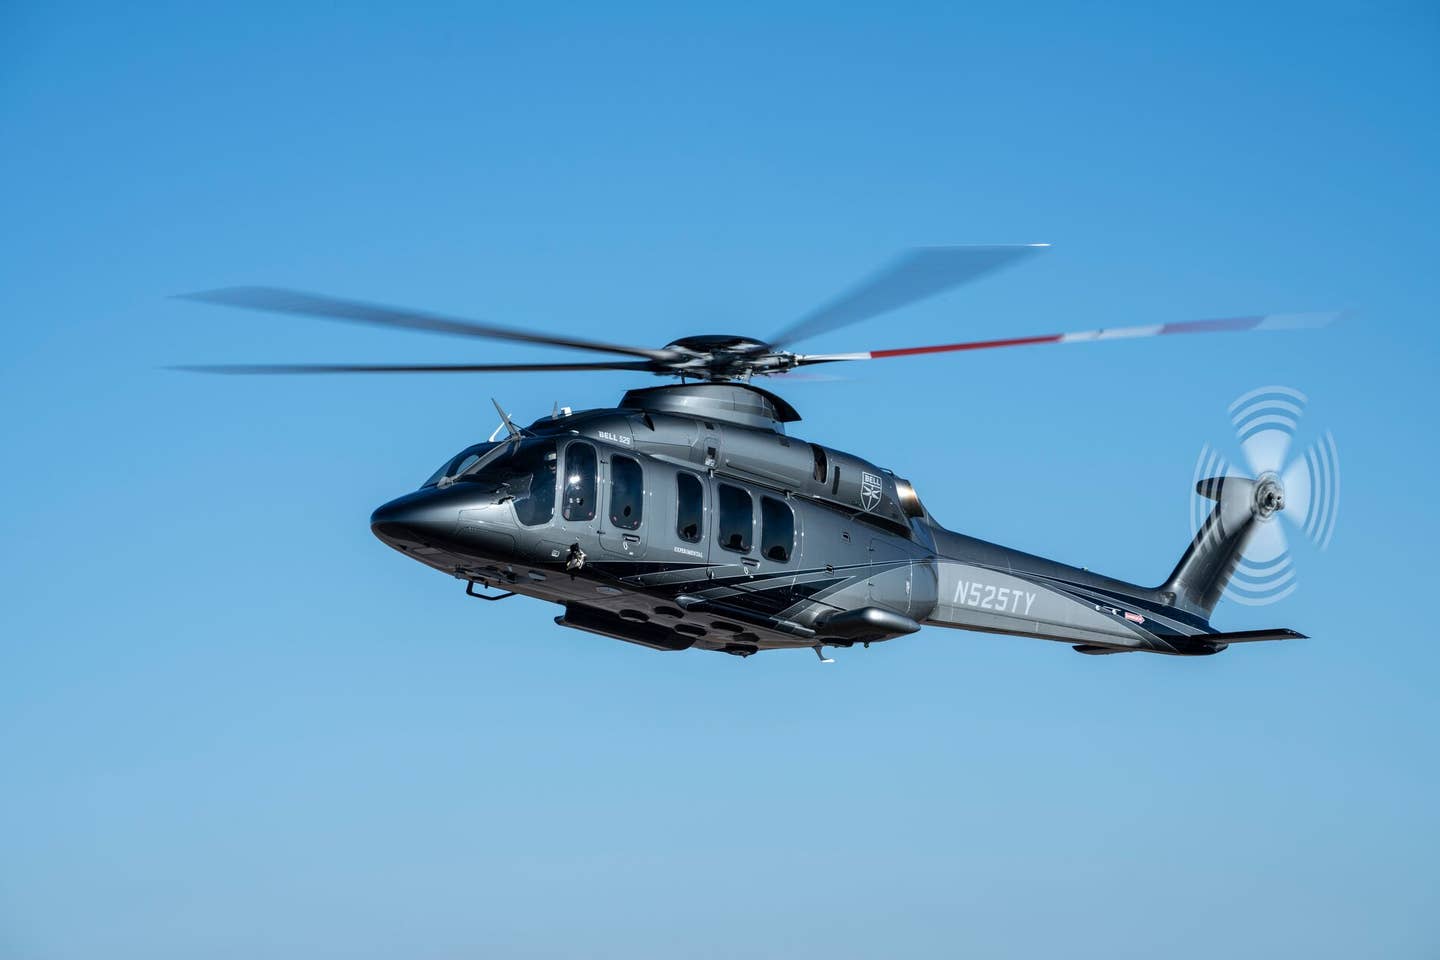 Rotor Roundup: What’s on the Horizon for Helicopters and eVTOLs?